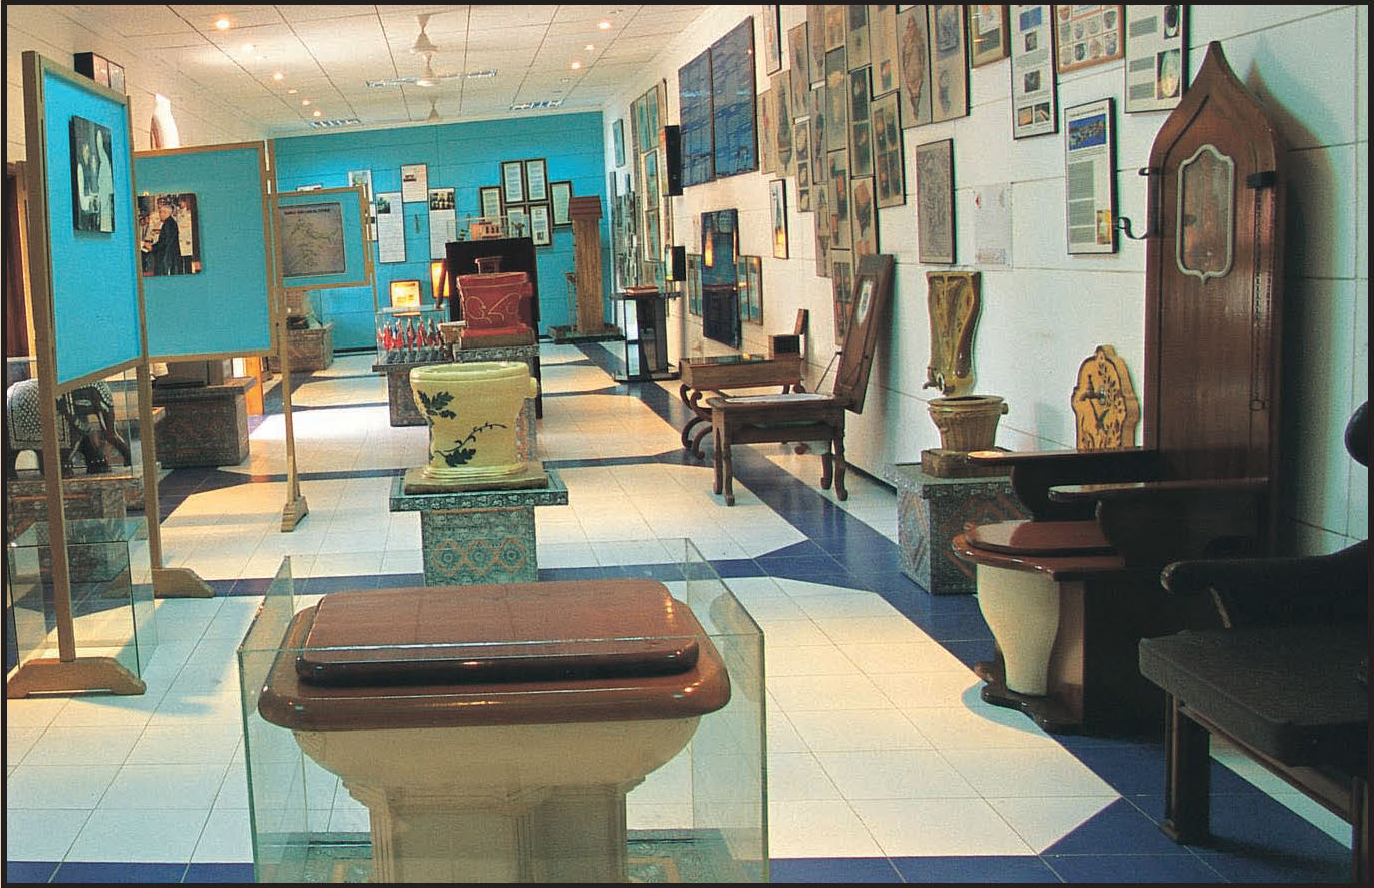 SULABH INTERNATIONAL MUSEUM OF TOILETS